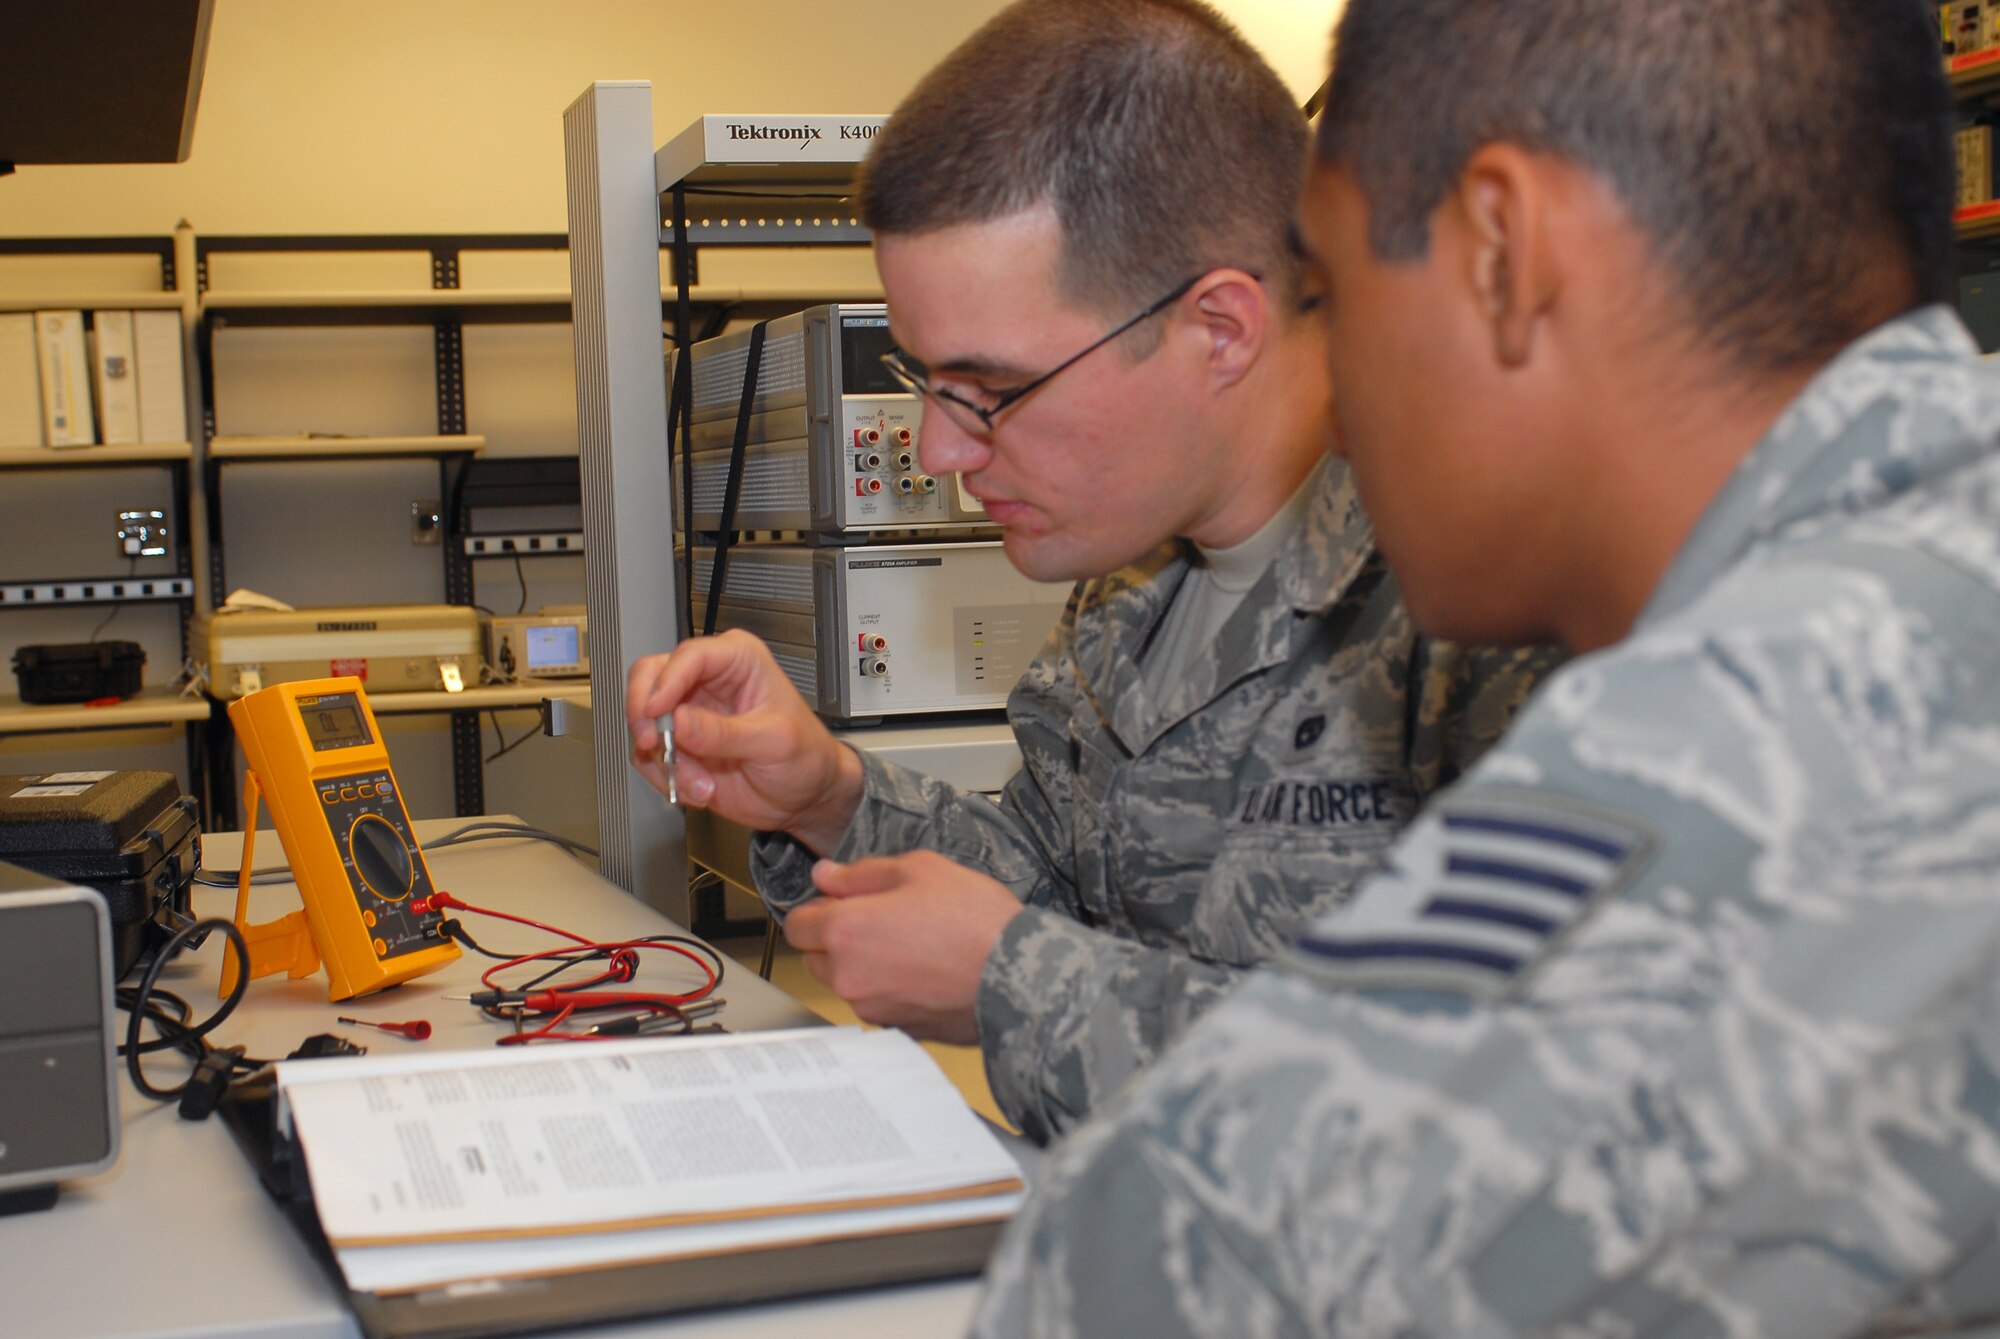 Staff Sgt. Steven Umana, 56th Component Maintenance Squadron Precision Measurement Equipment Laboratory (PMEL) journyeman, evaluates Airman 1st Class David Munn, 56th Component Maintenance Squadron PMEL apprentice, April 7 on his ability to correctly perform an input power safety inspection. This inspection is required on every piece of electrical and electronic support equipment that enters PMEL. (U.S. Air Force photo by Senior Airman Tracie Forte)
